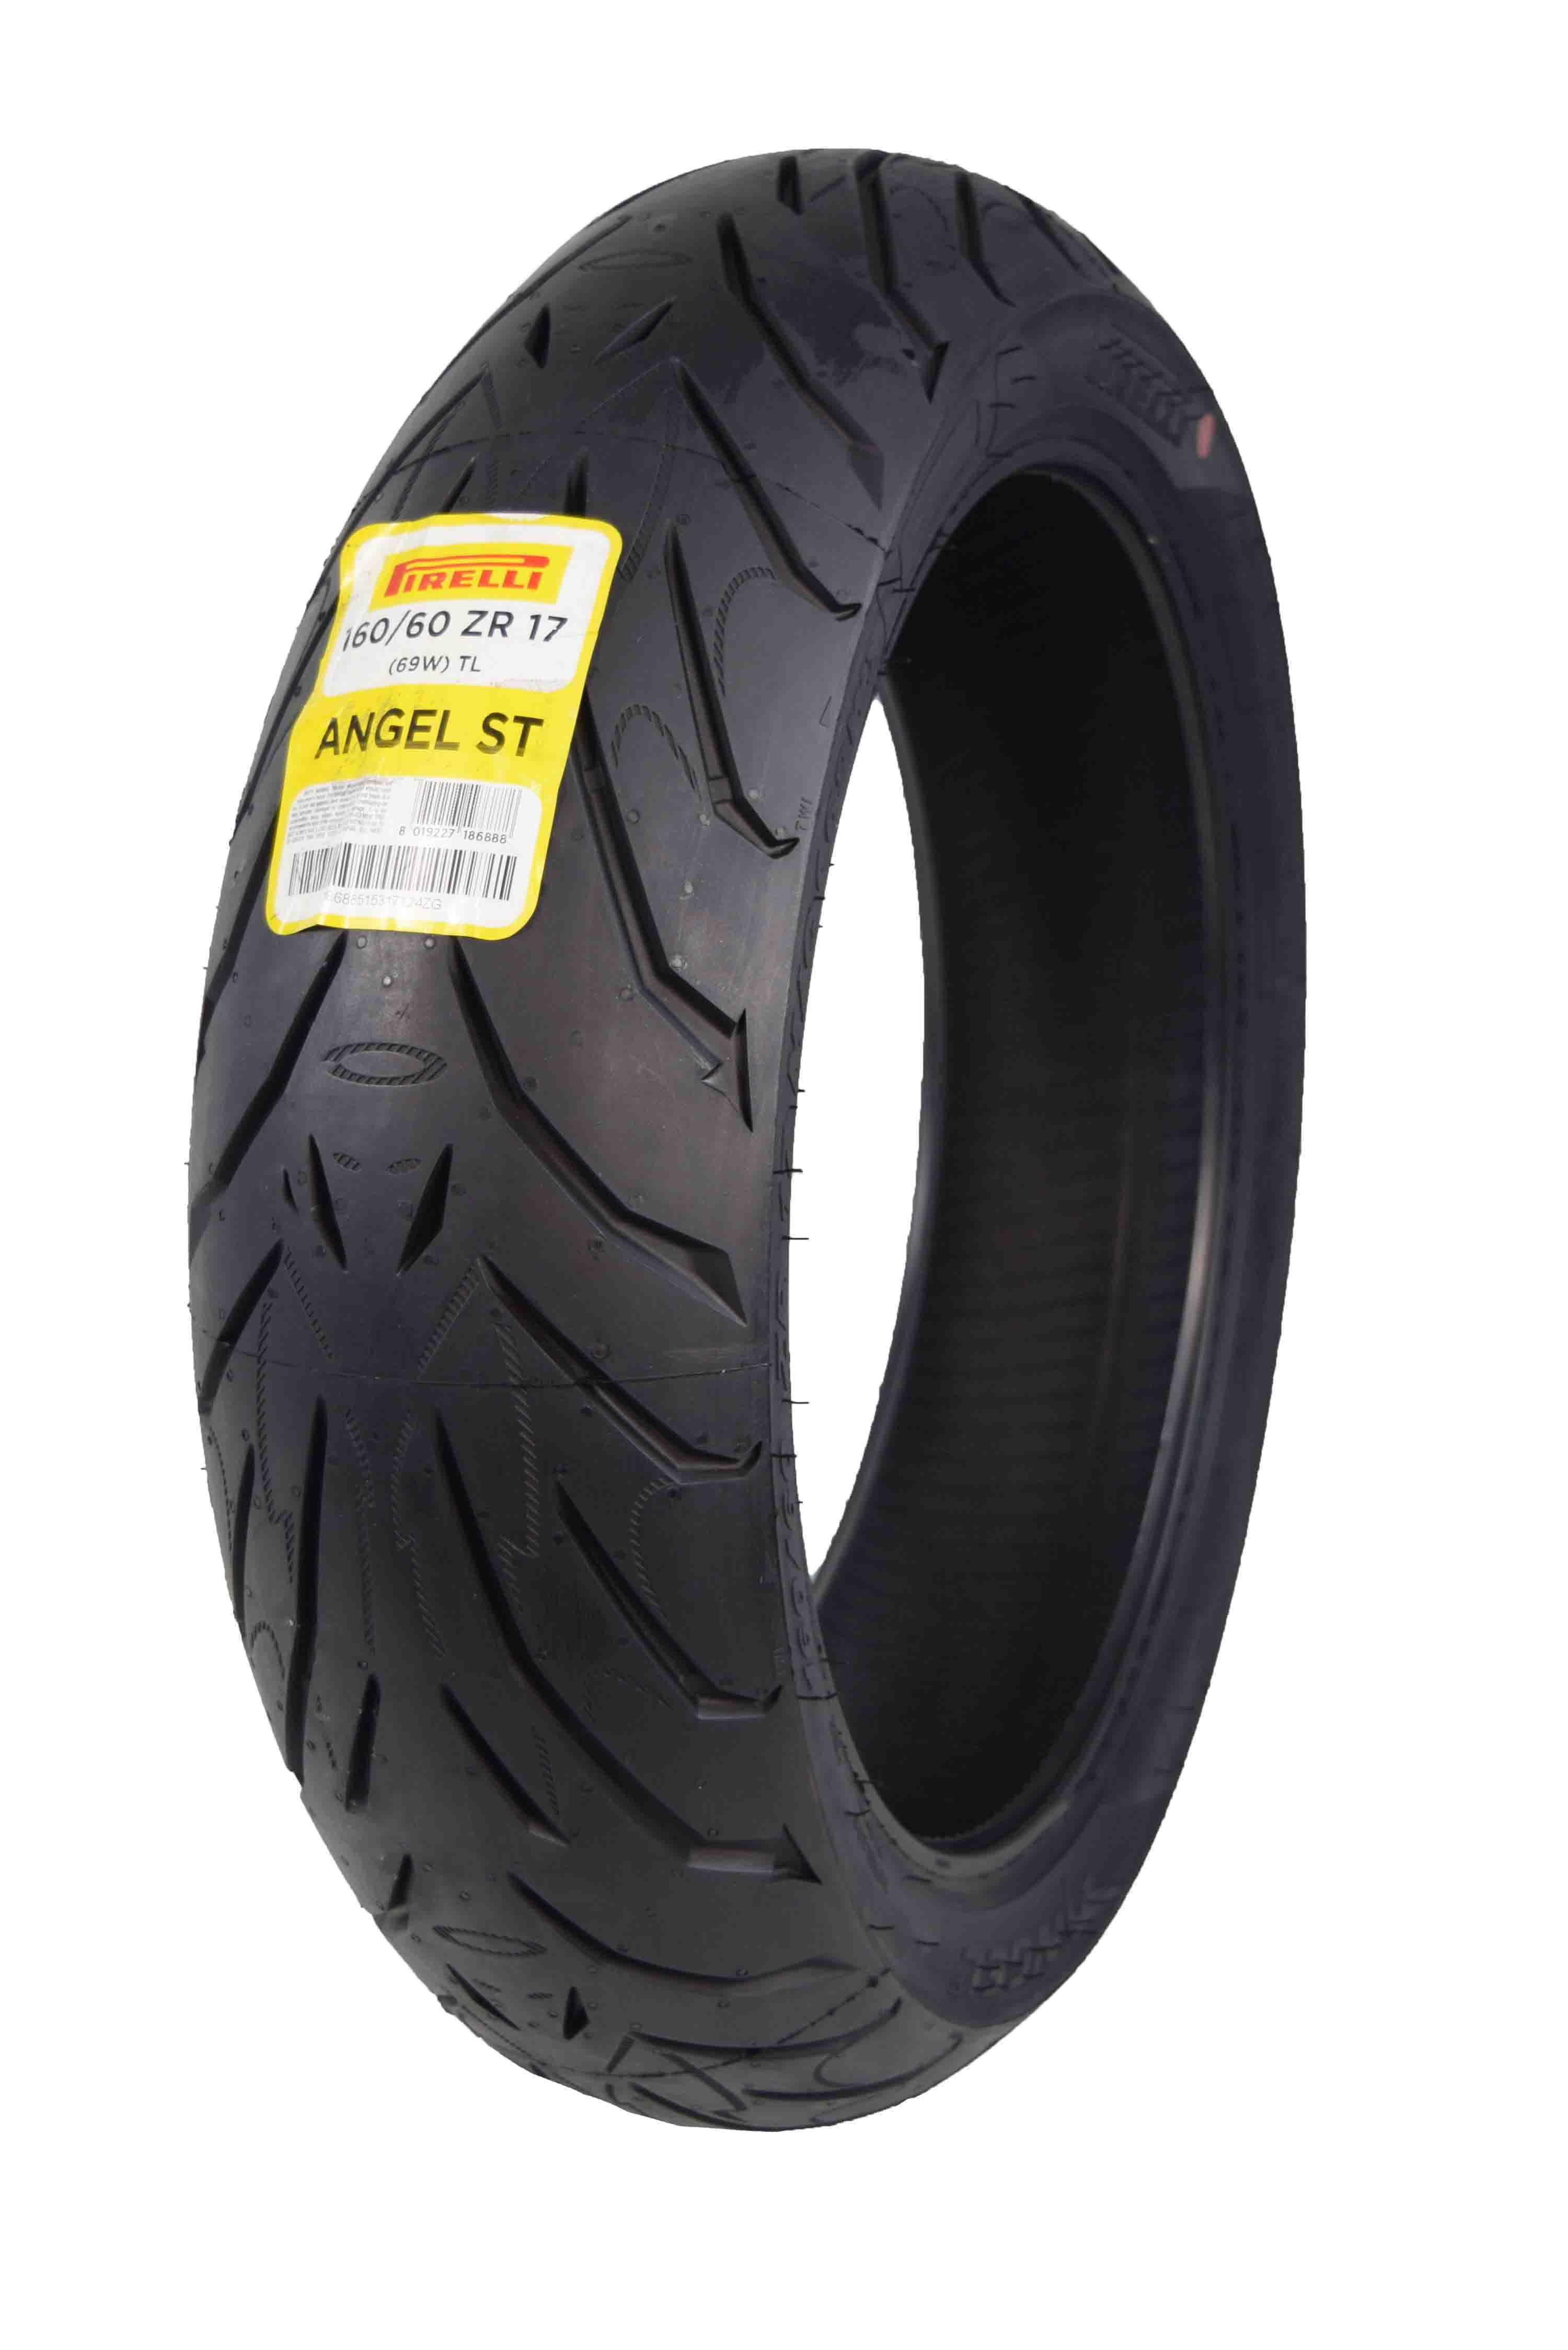 A Pirelli Angel ST 120/70 ZR17 58W Front Motorcycle Tyre 